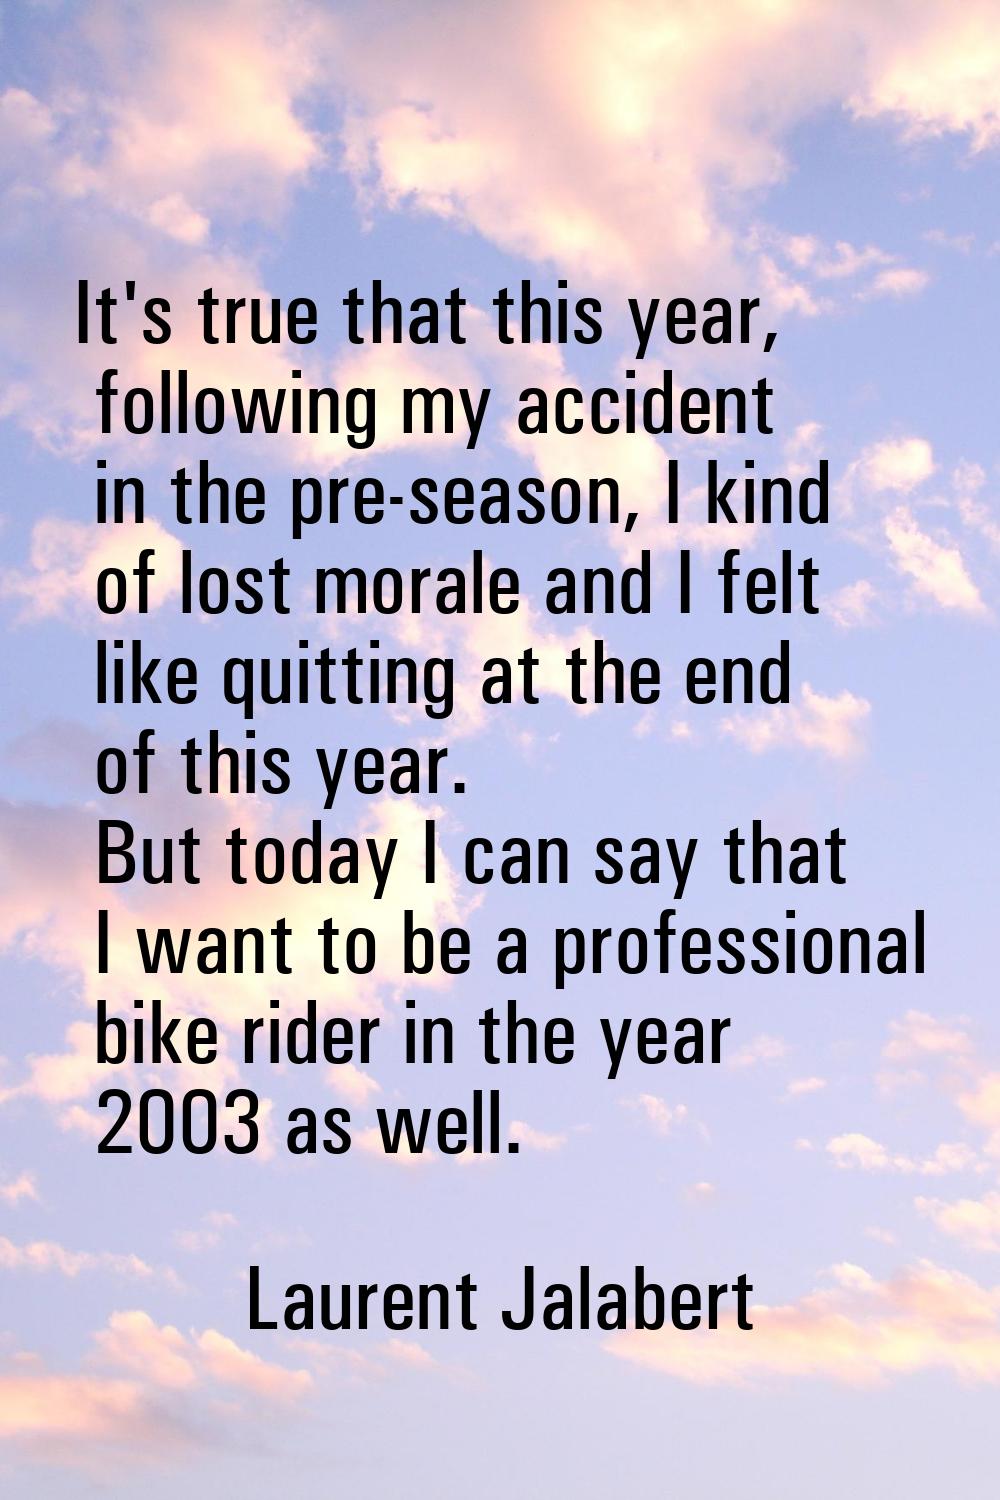 It's true that this year, following my accident in the pre-season, I kind of lost morale and I felt